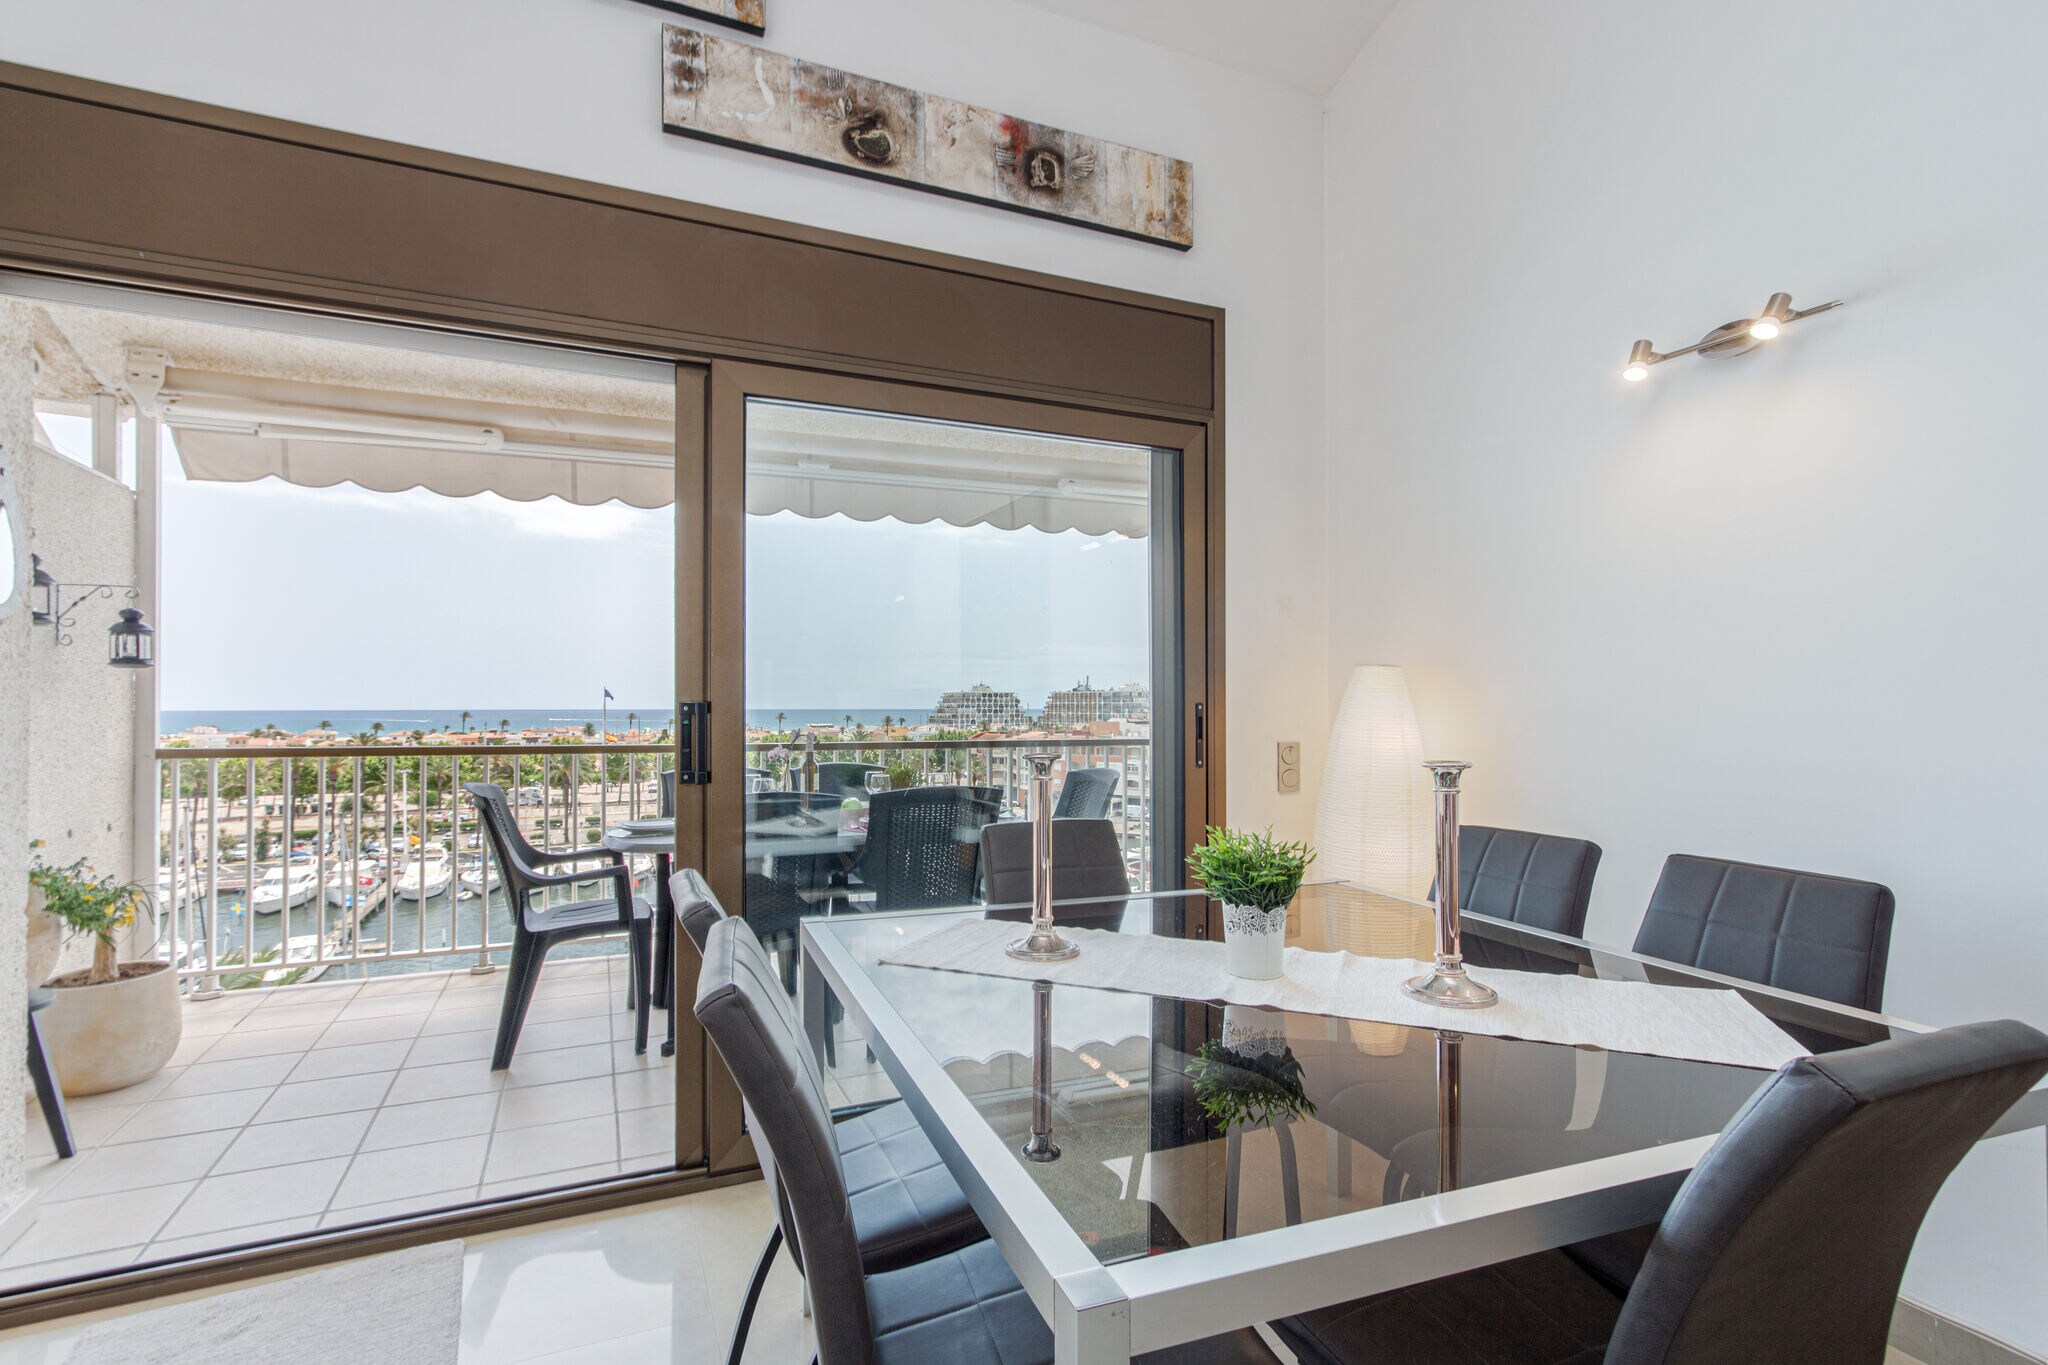 Sea-view Apartment in Empuriabrava with Roof Terrace